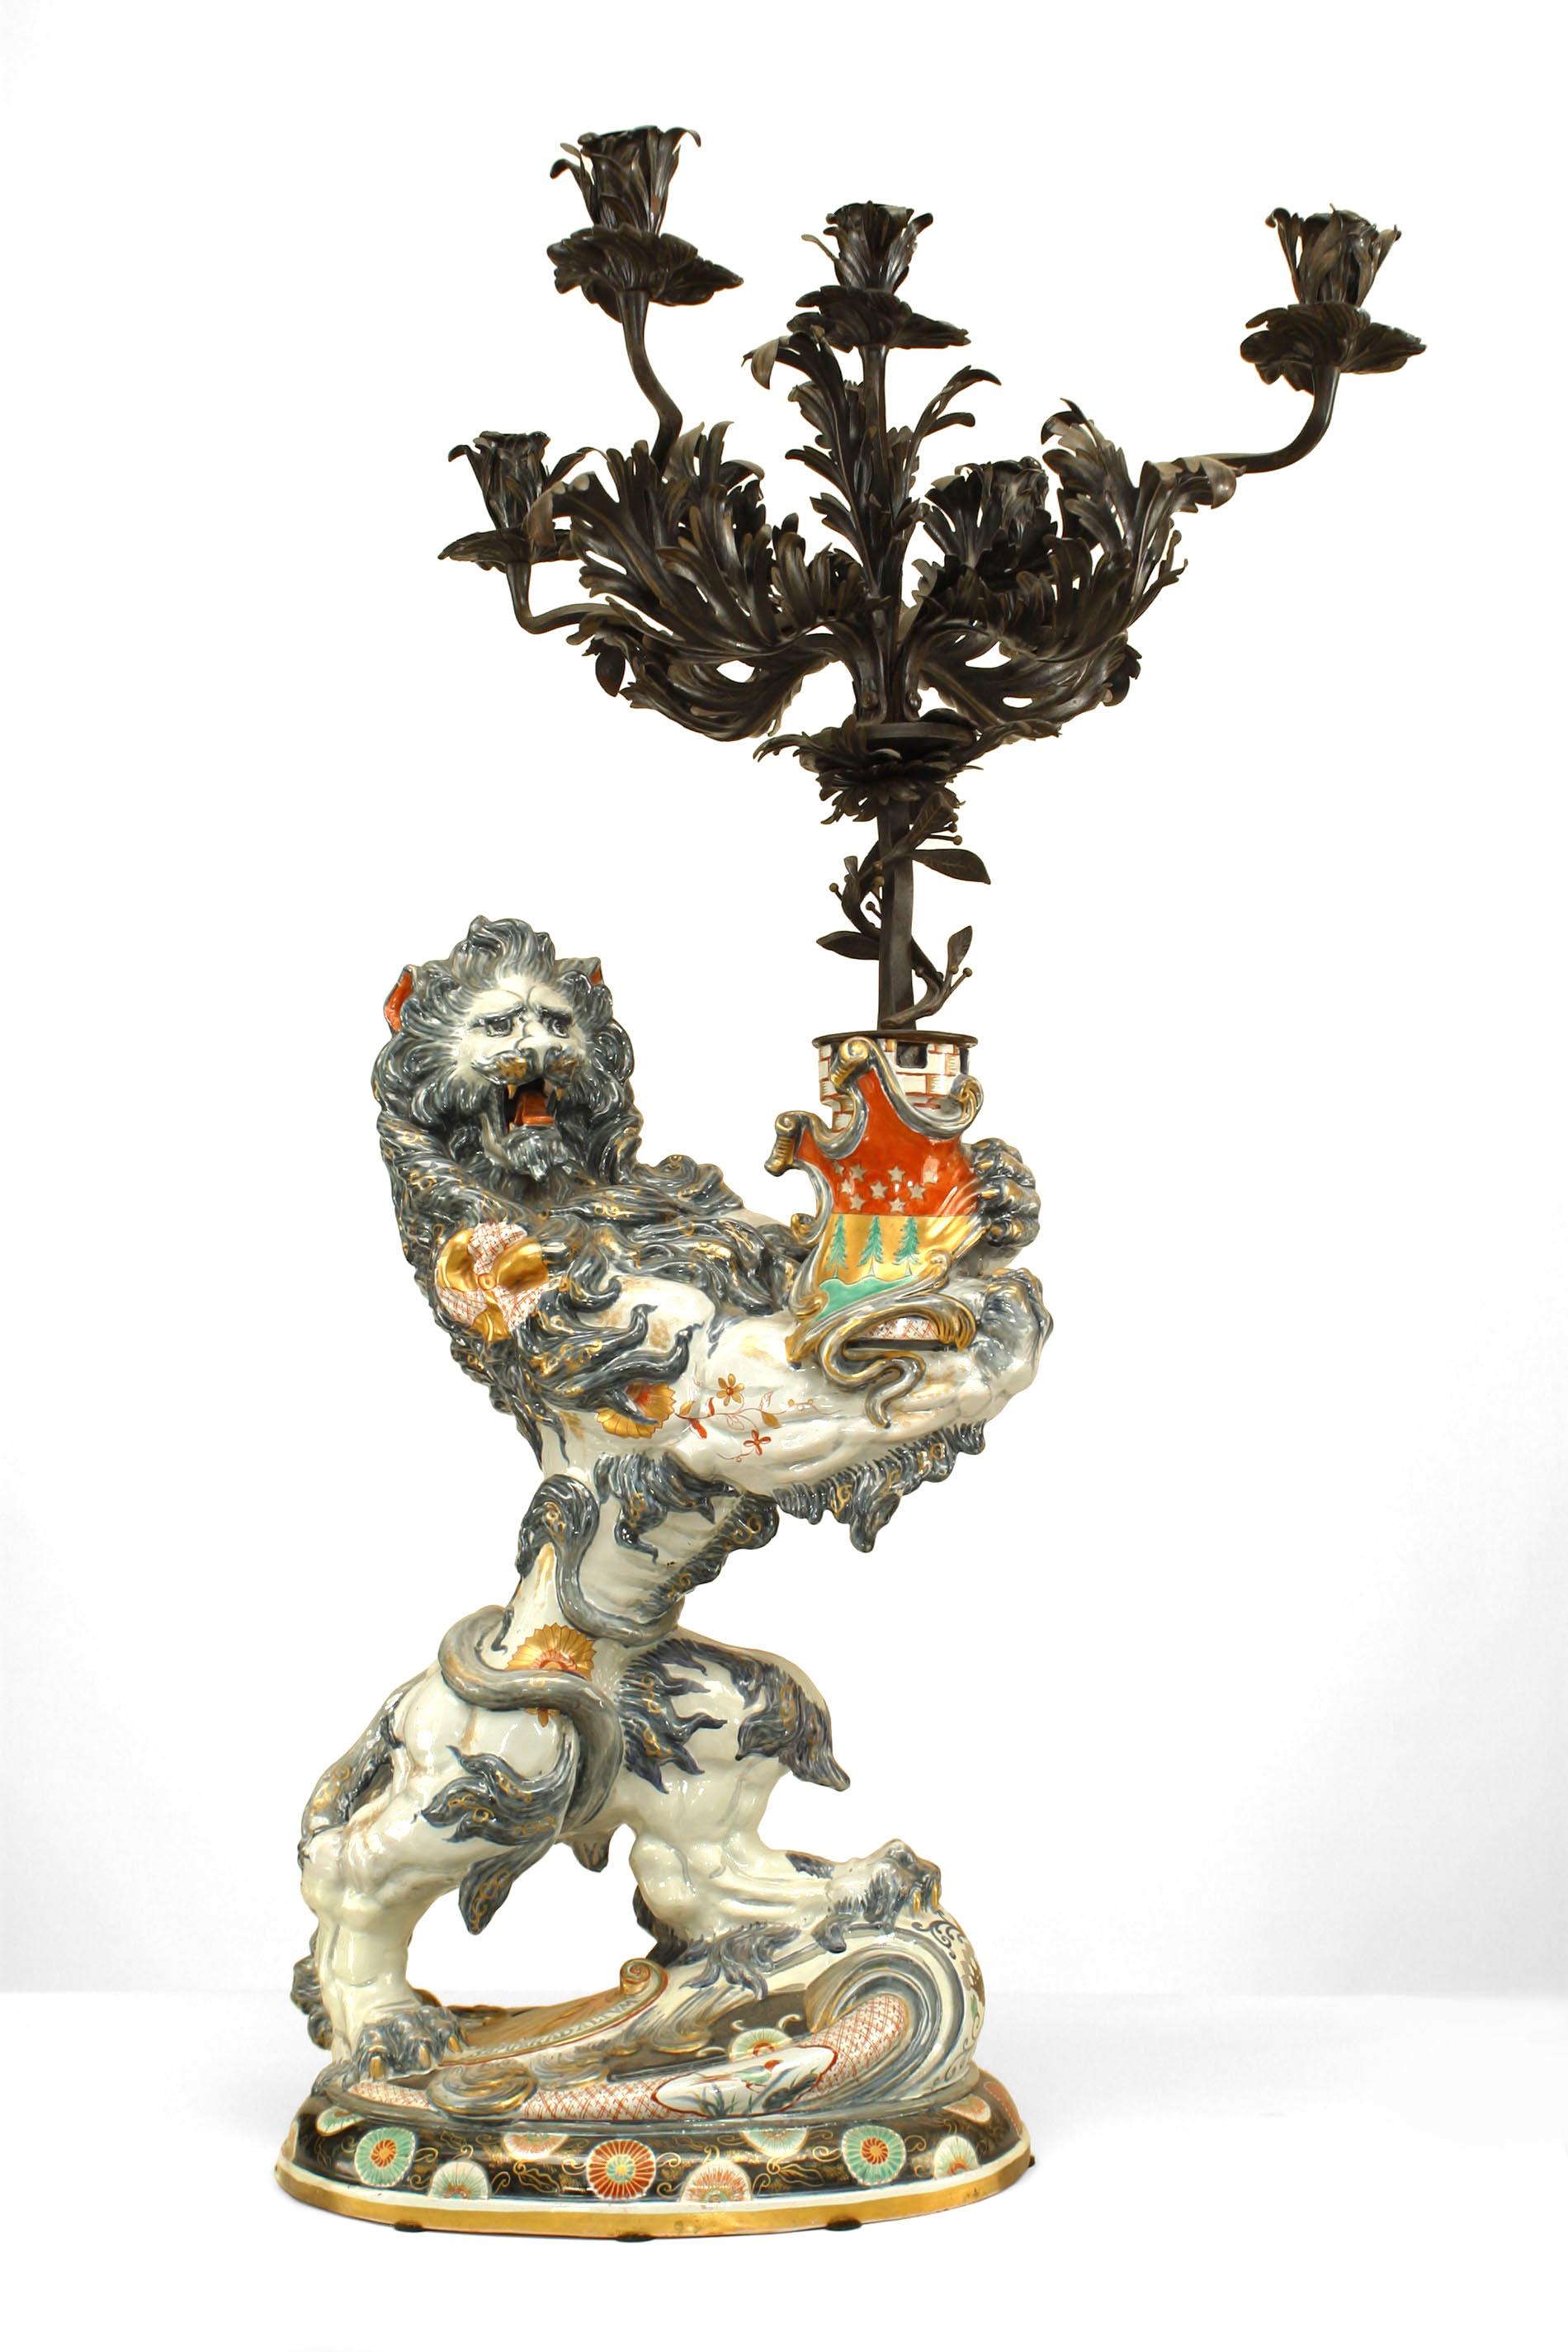 Pair of French Victorian (19th Century) large porcelain lion figures holding wrought iron candelabras (signed by EMILE GALLE 